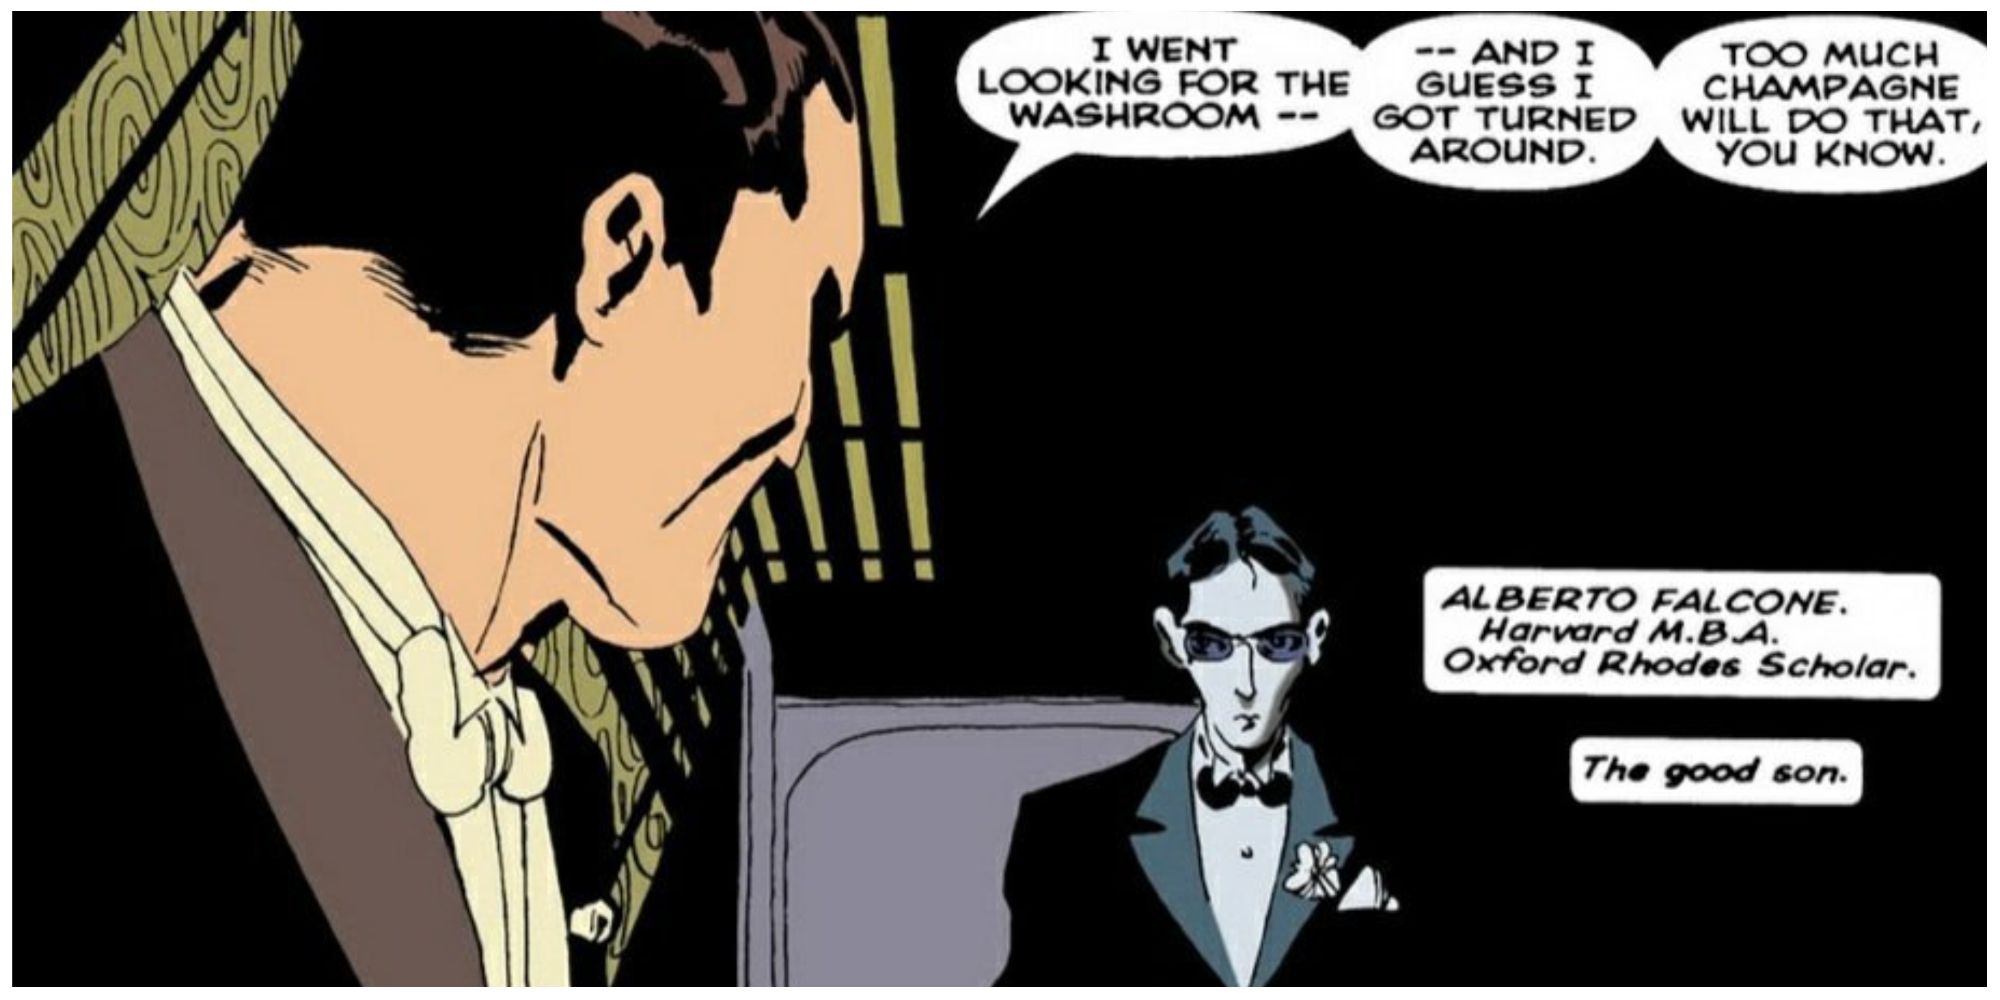 Alberto Falcone as the Holiday Killer in Long Halloween in in DC Comics